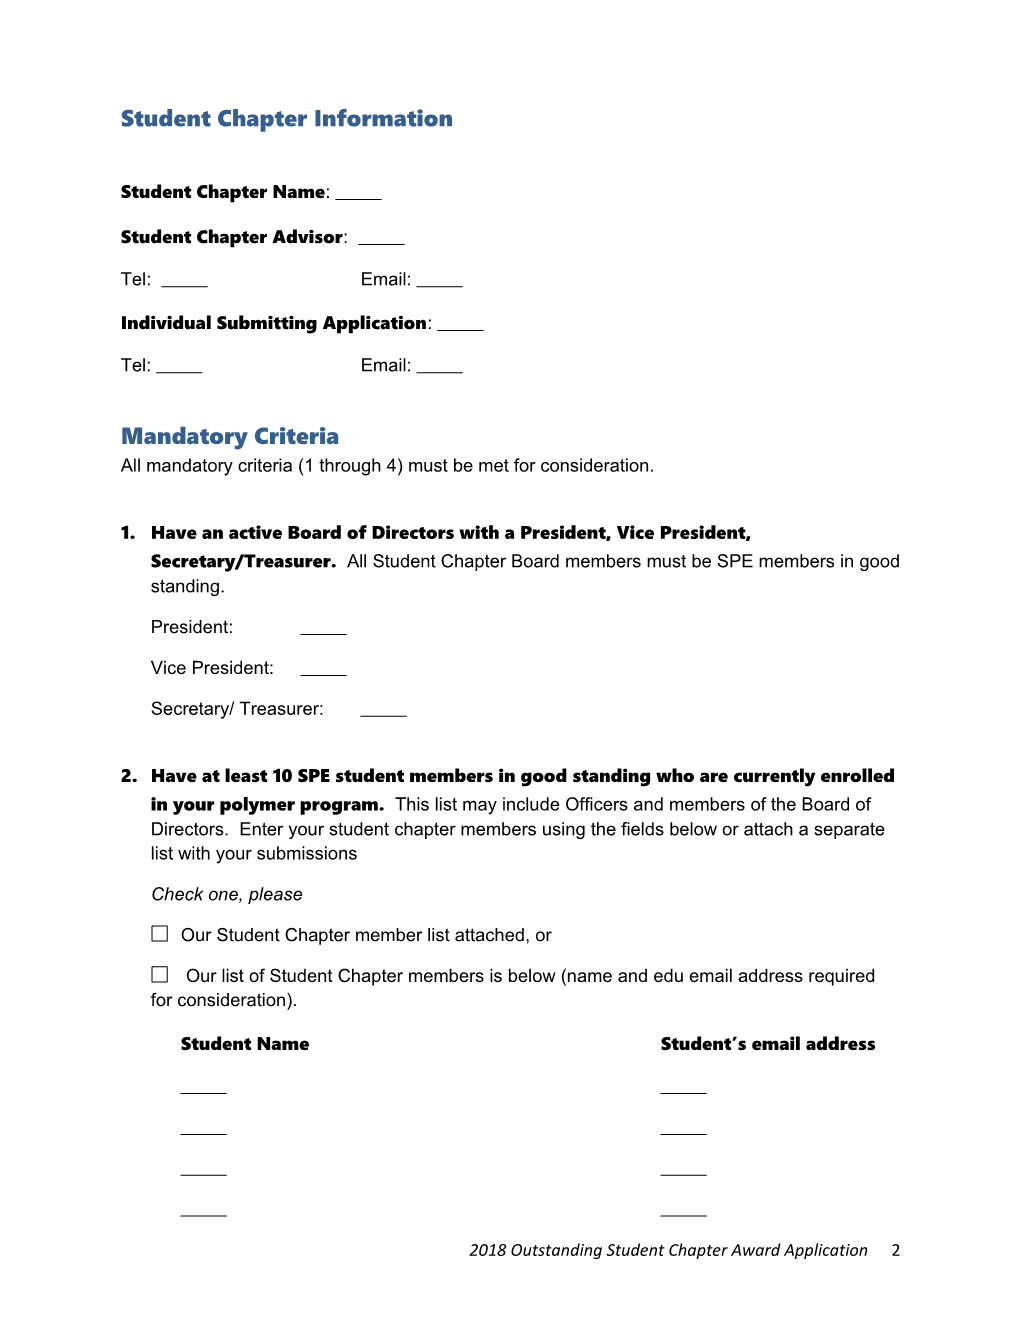 2012 Outstanding Student Chapter Award Application